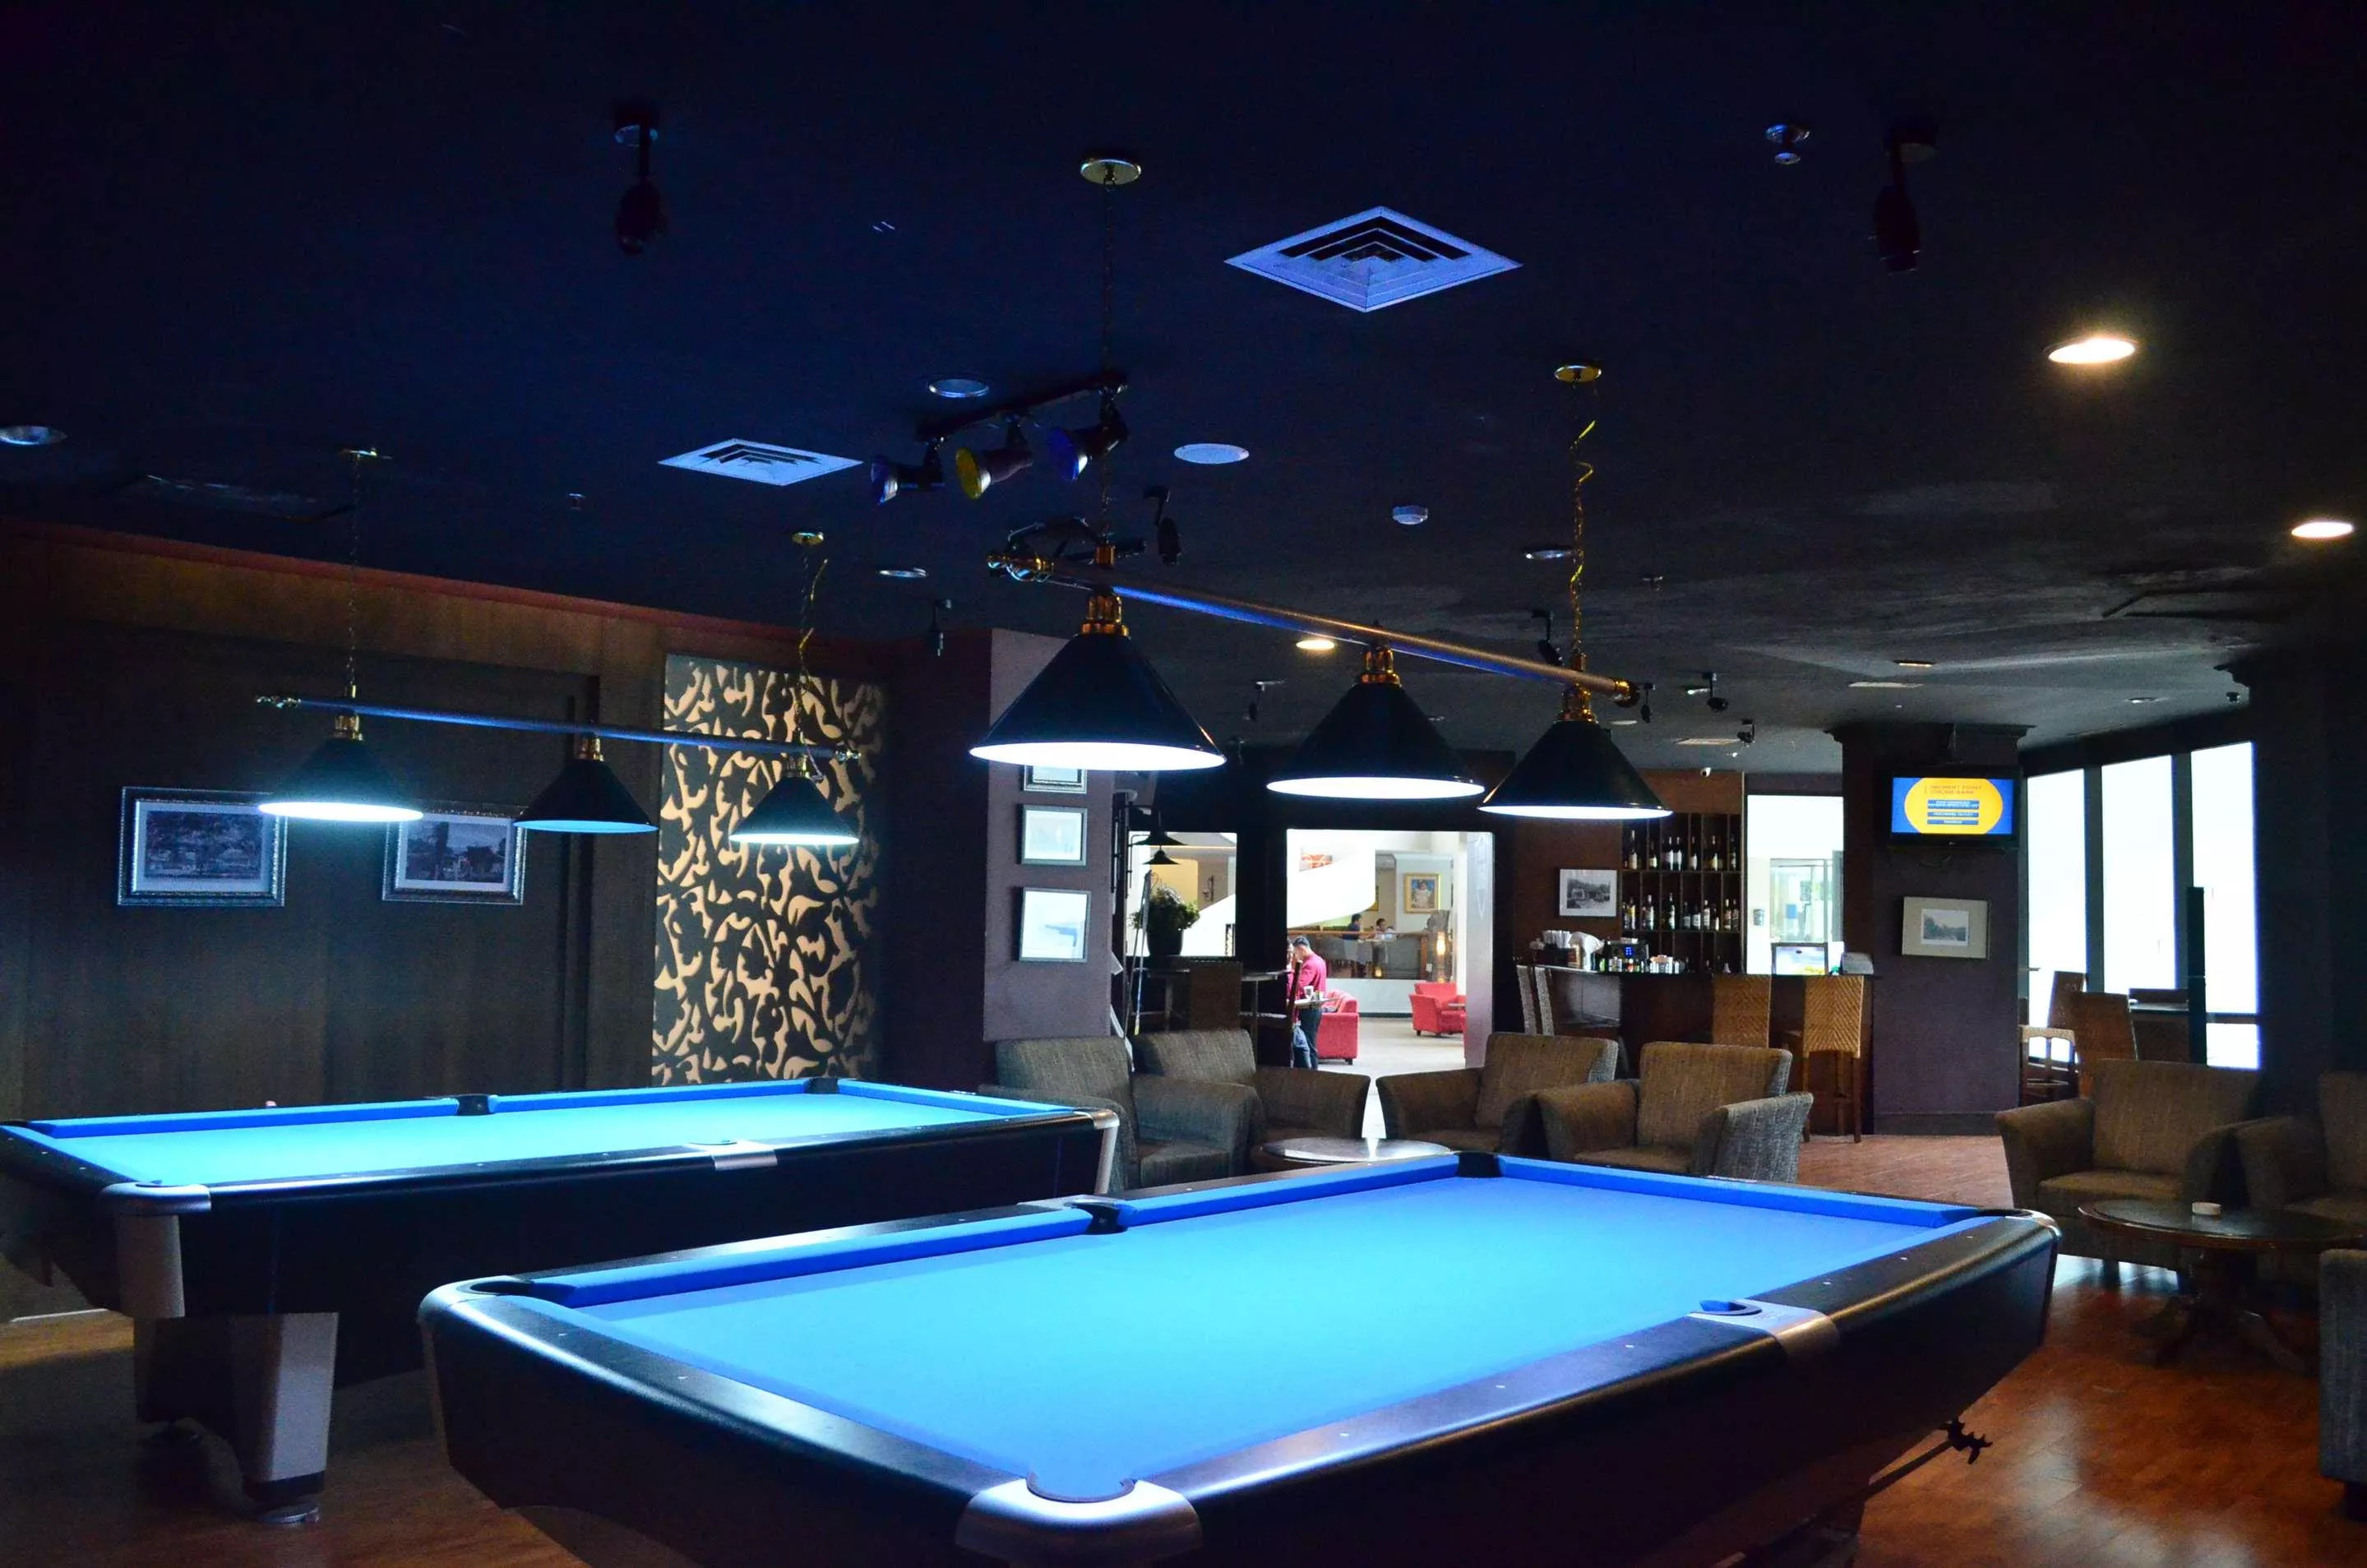 Barcode Pool Tables in Indonesia, Central Asia | Billiards - Rated 3.8